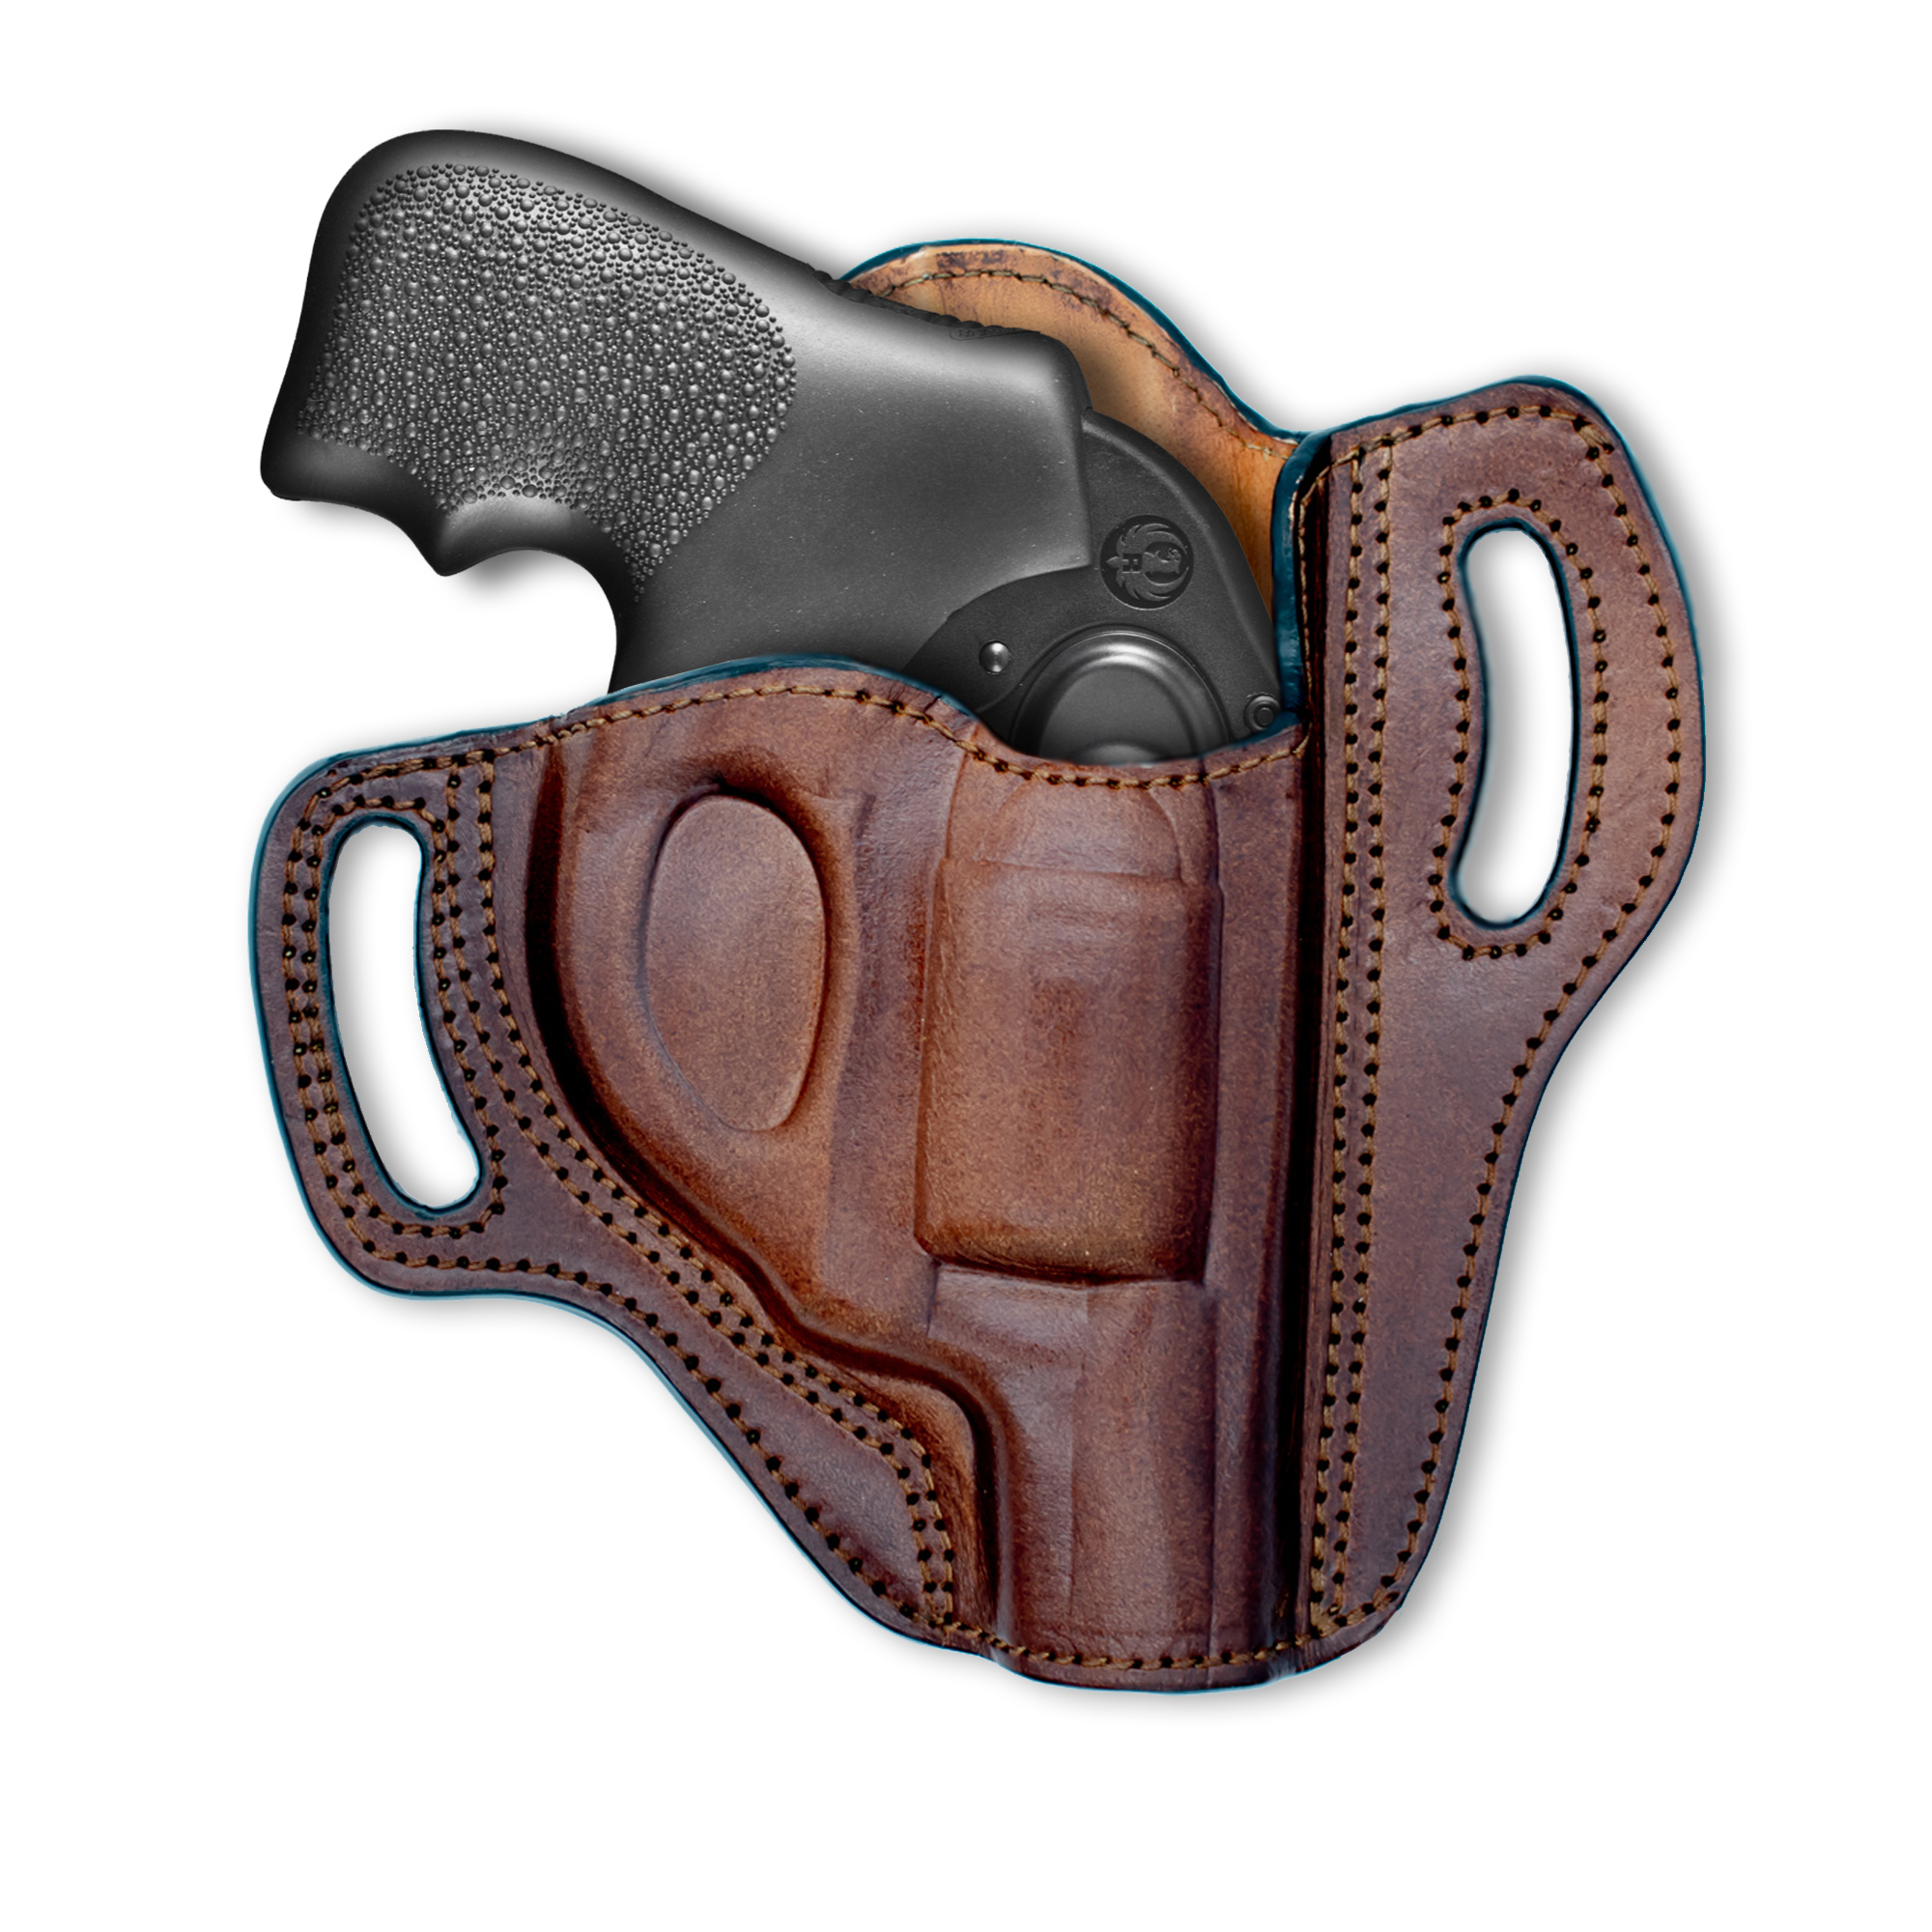  Cardini Leather - OWB Leather Holster for S&W J Frame, for  Ruger LCR and SP101, and Other 38 Special Snub Nose Revolvers up to 2.25  Barrel (Black, 642 (Left Hand